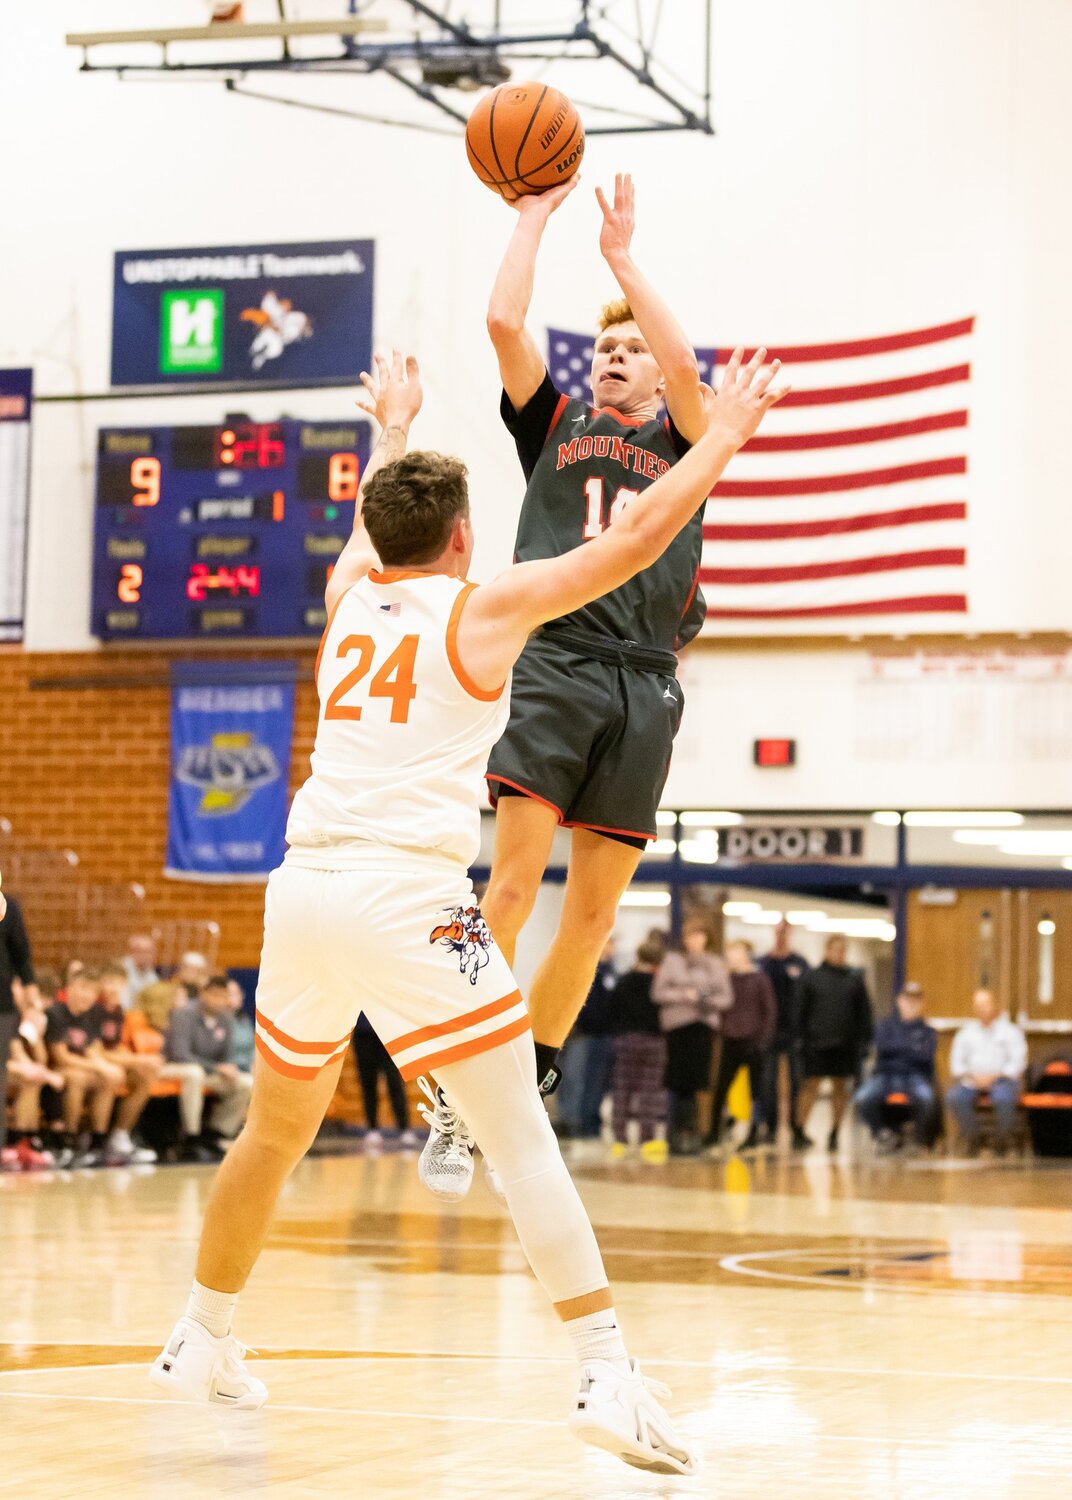 Hayden Hess scored a career high 20 points in the first meeting between Southmont and North Montgomery back on Dec. 1. The two county rivals will meet again on Friday in the opening round of the 17th annual Boys Sugar Creek Classic.